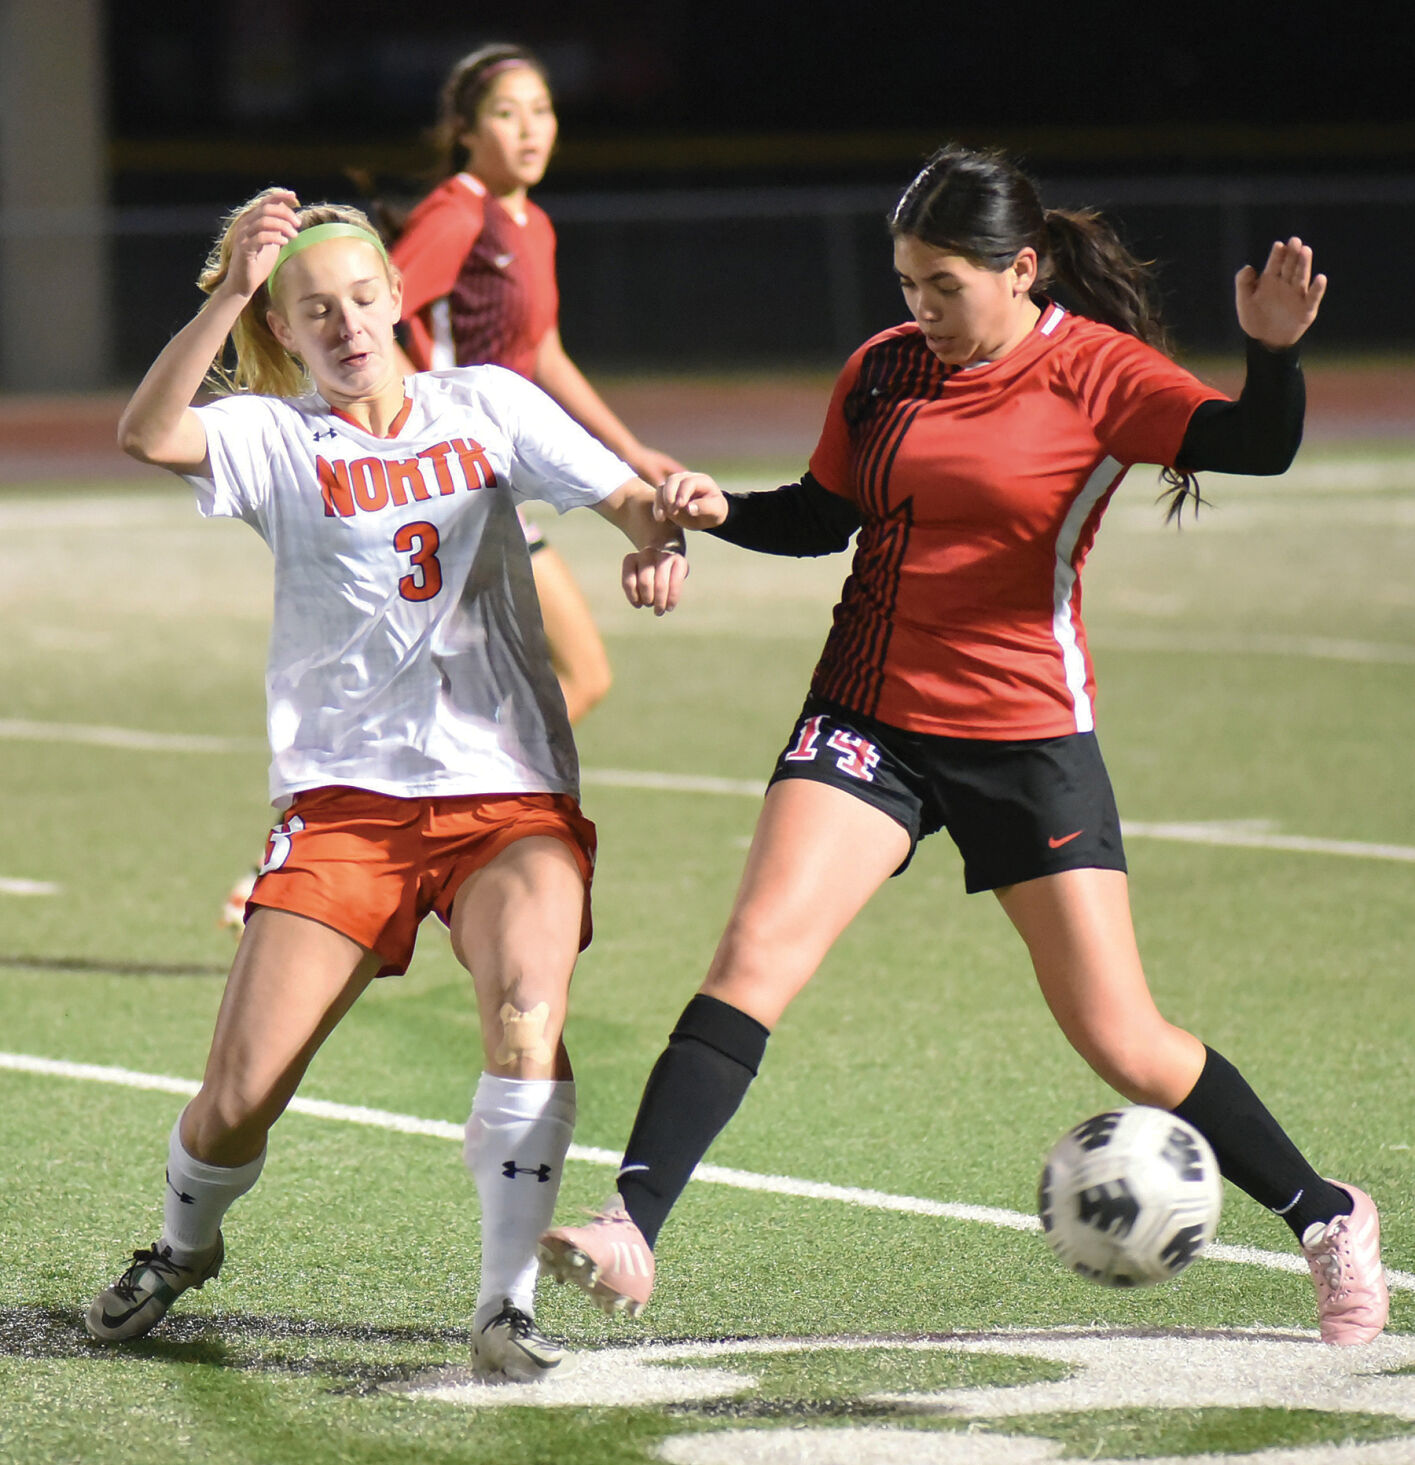 Caddo Mills Set to Compete in Greenville Lady Lions’ Girls Soccer Tournament